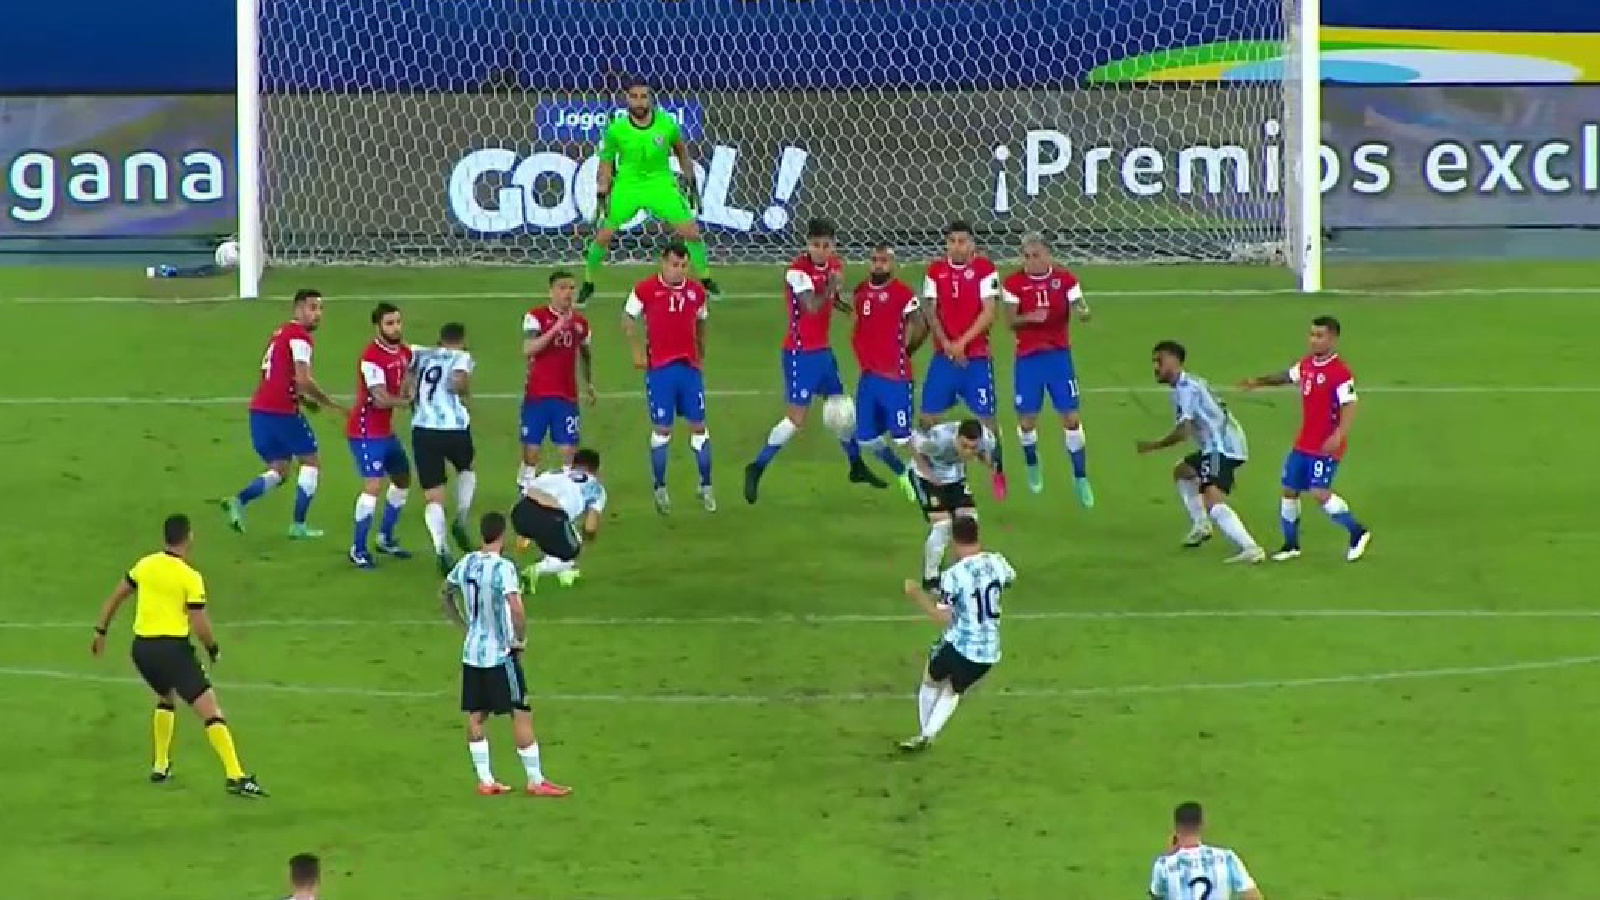 Lionel Messi in the process of scoring a picture perfect free kick against Chile